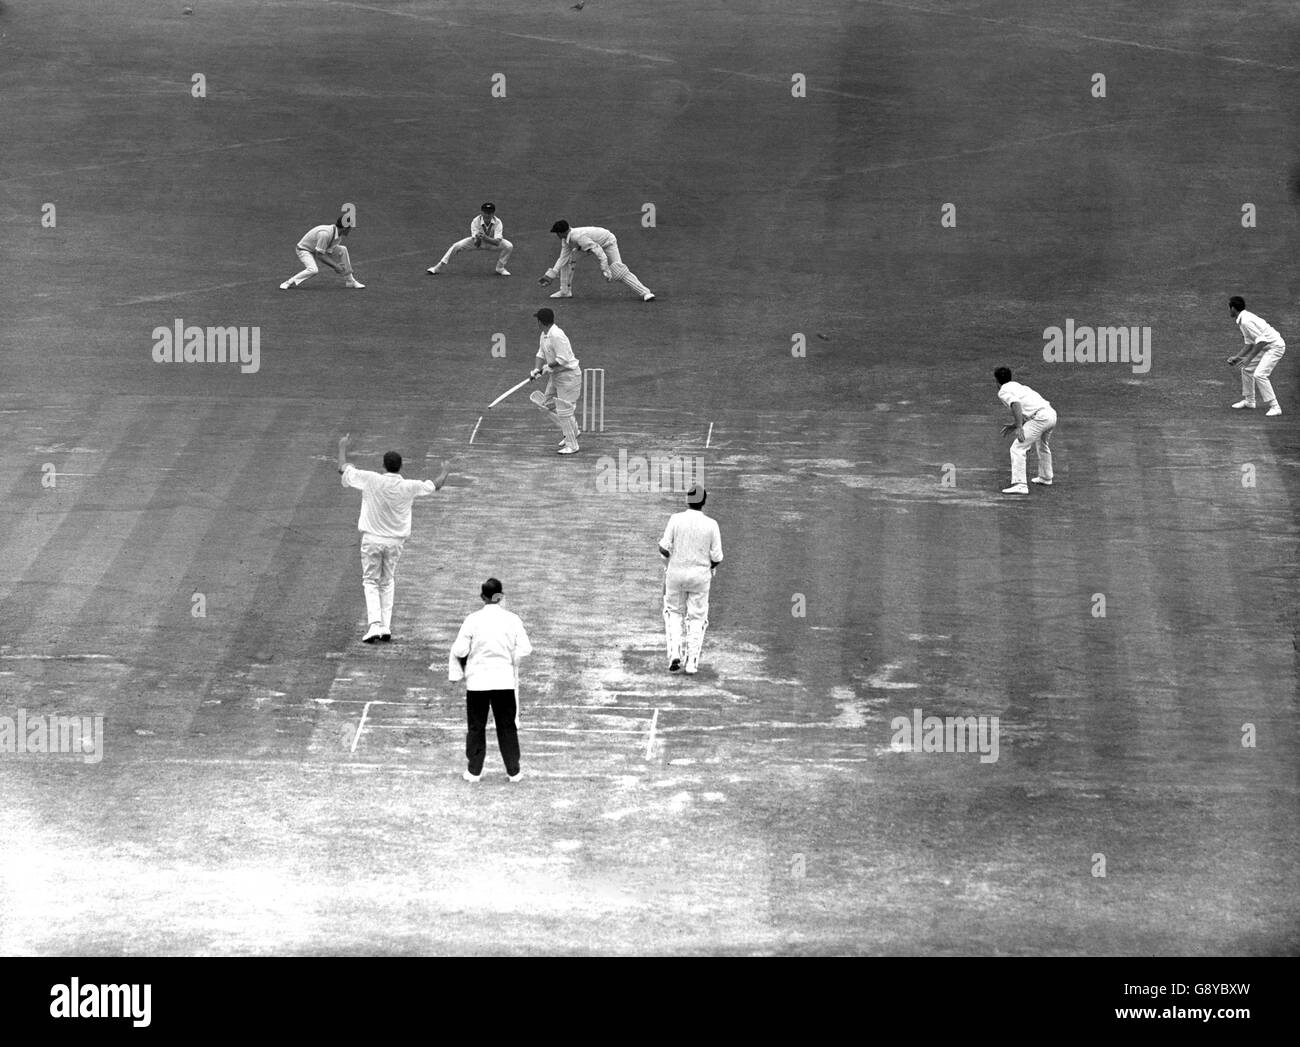 England v New Zealand - First Test Match - Lord's. England's Phil Sharpe is caught at slip by Glenn Turner, off the bowling of B Taylor for 20. Stock Photo